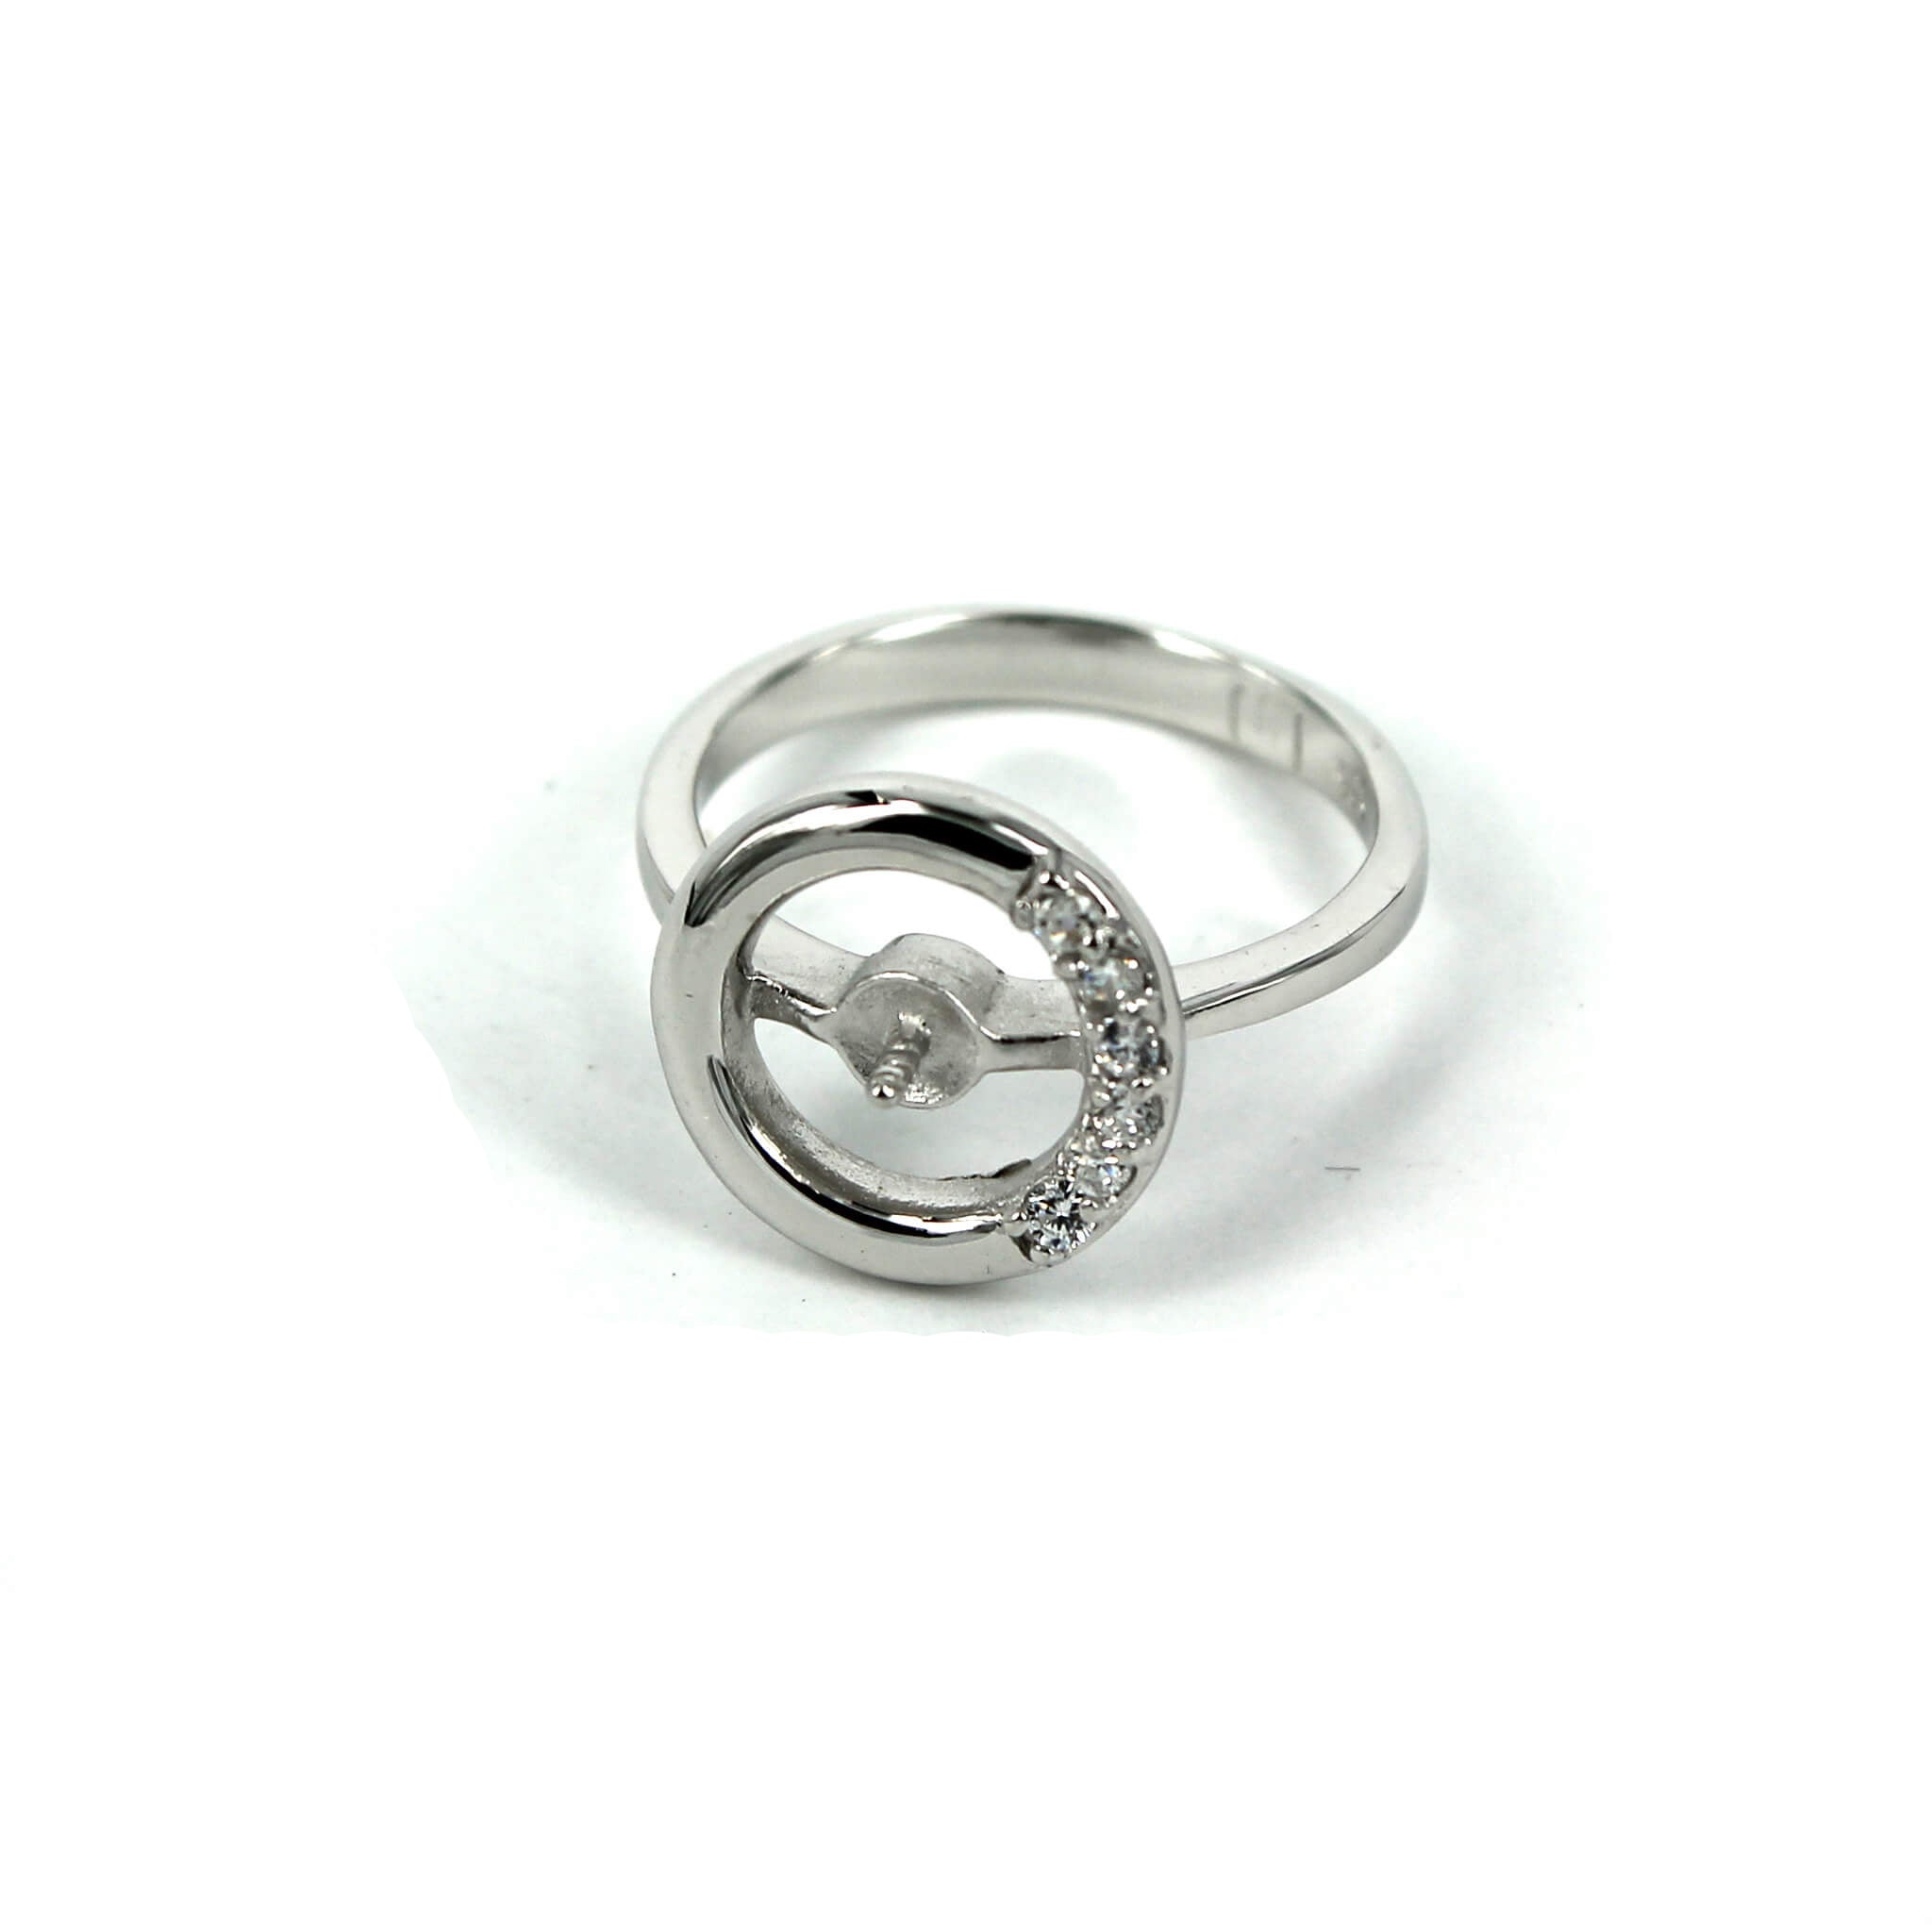 Ring with Cubic Zirconia Inlays and Peg Mounting in Sterling Silver 9mm